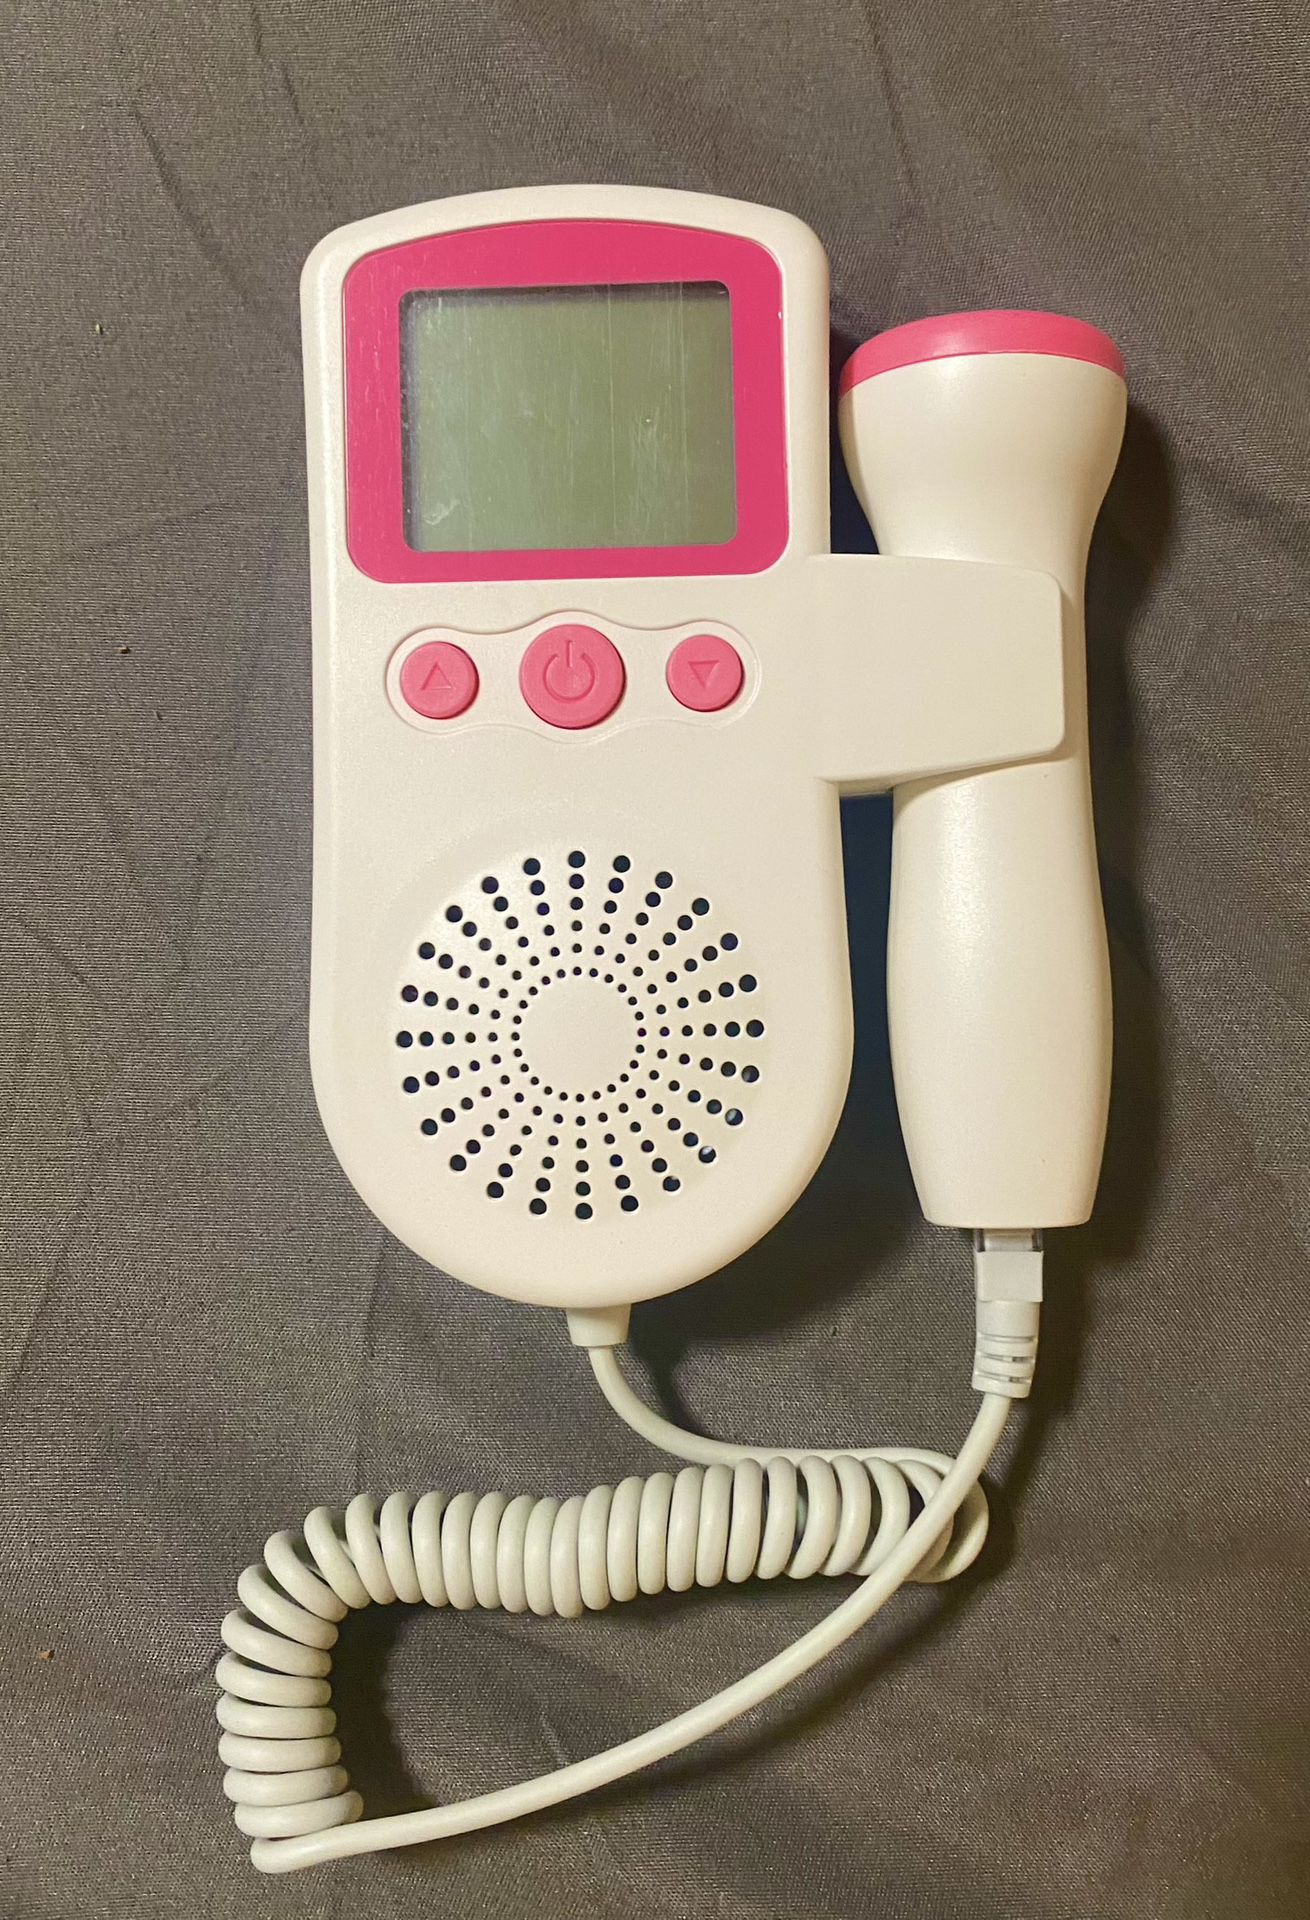 Pregnancy Fetal Baby Heart Rate Monitor Doppler At Home 